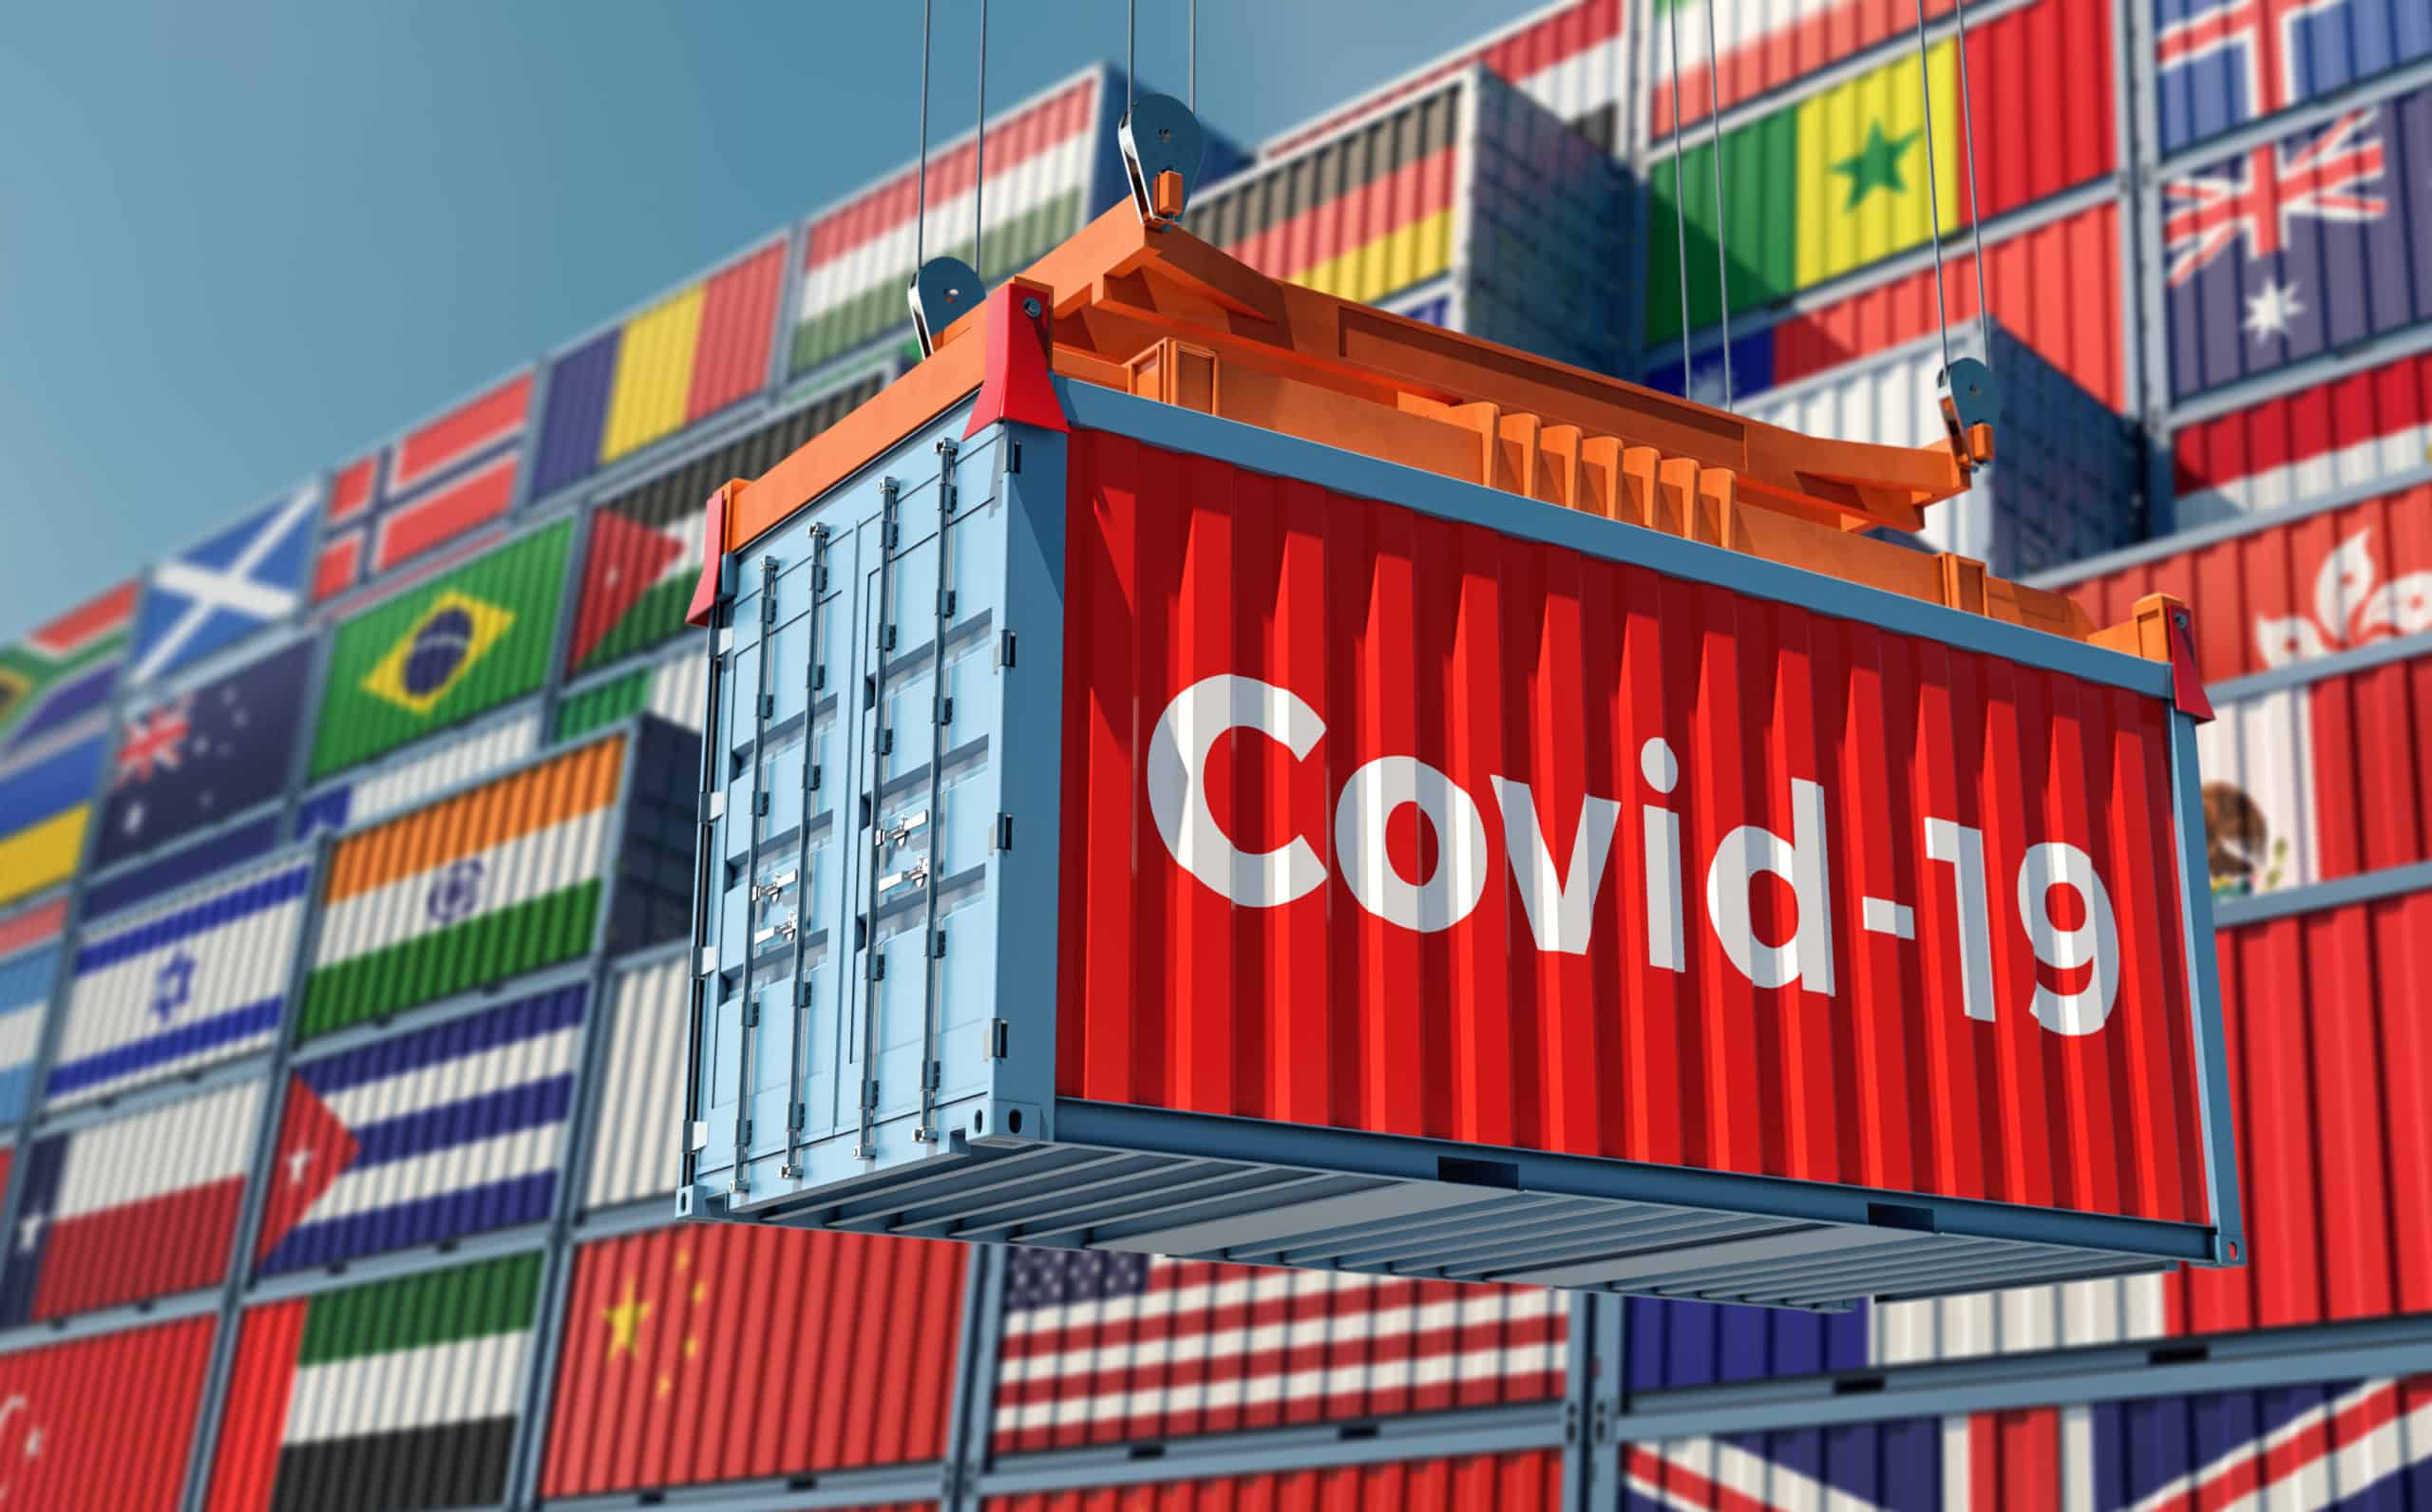 Blog: International Trade Update: From The Coronavirus And Force Majeure To A Forgotten Brexit